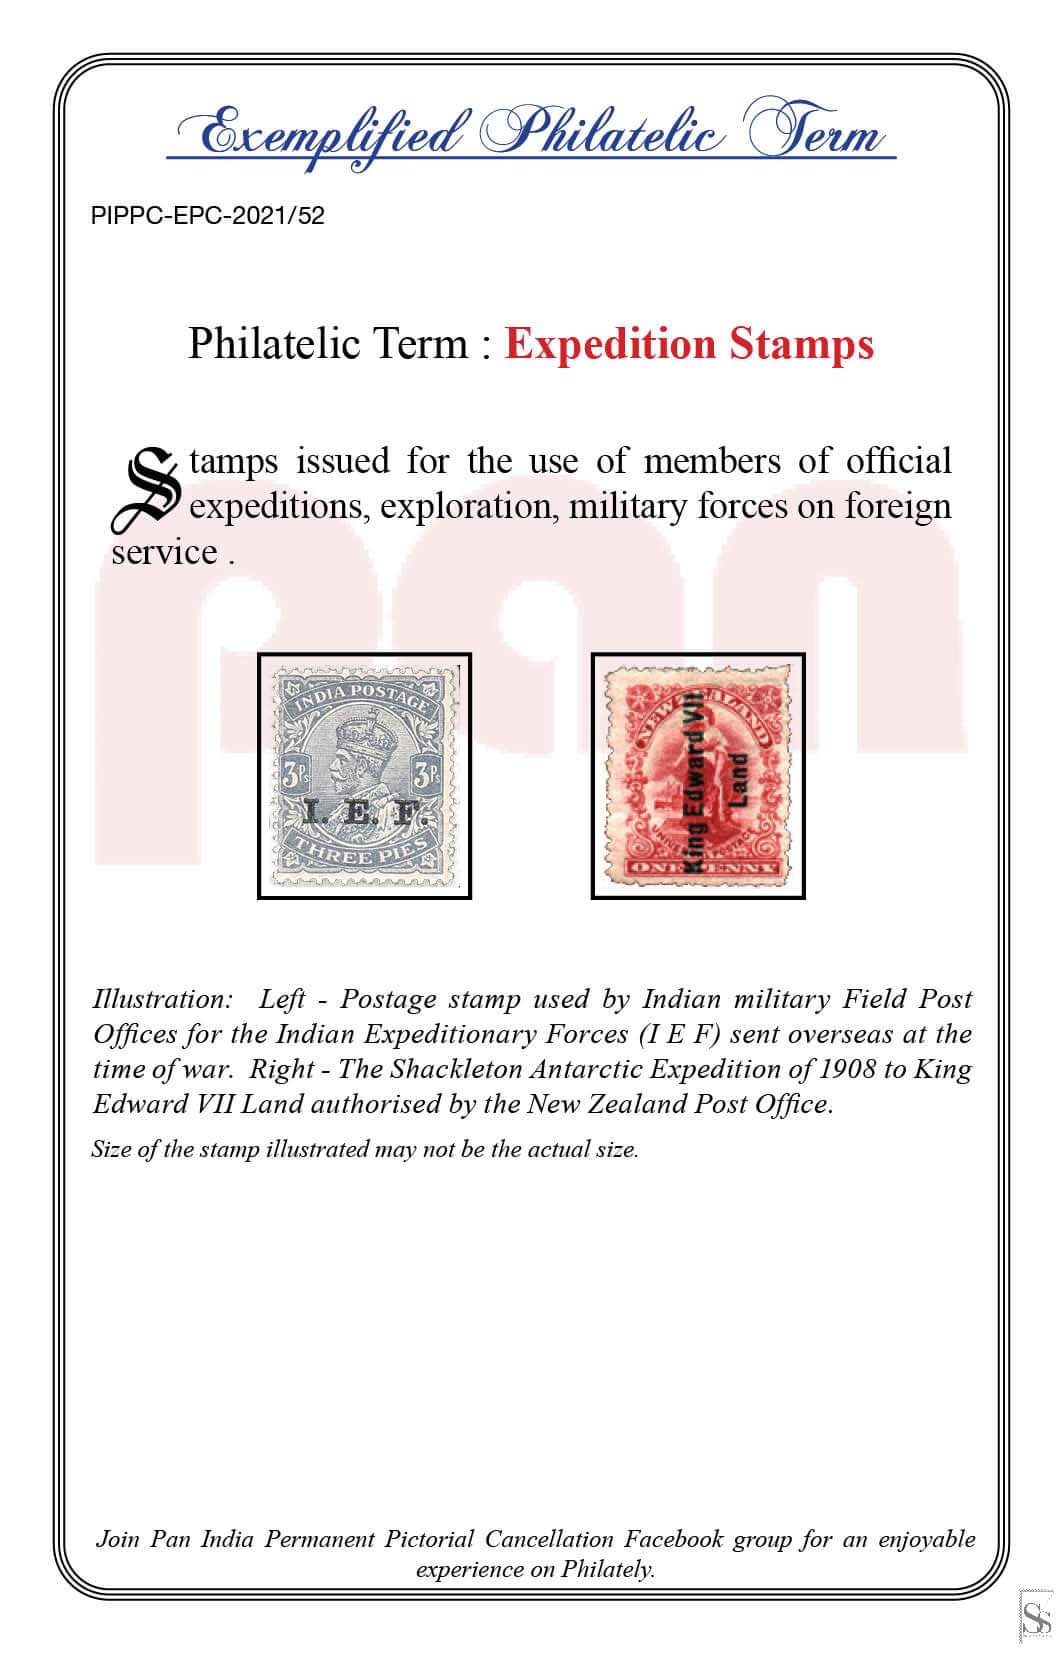 52. Today's Exemplified Philatelic term-Expedition Stamps